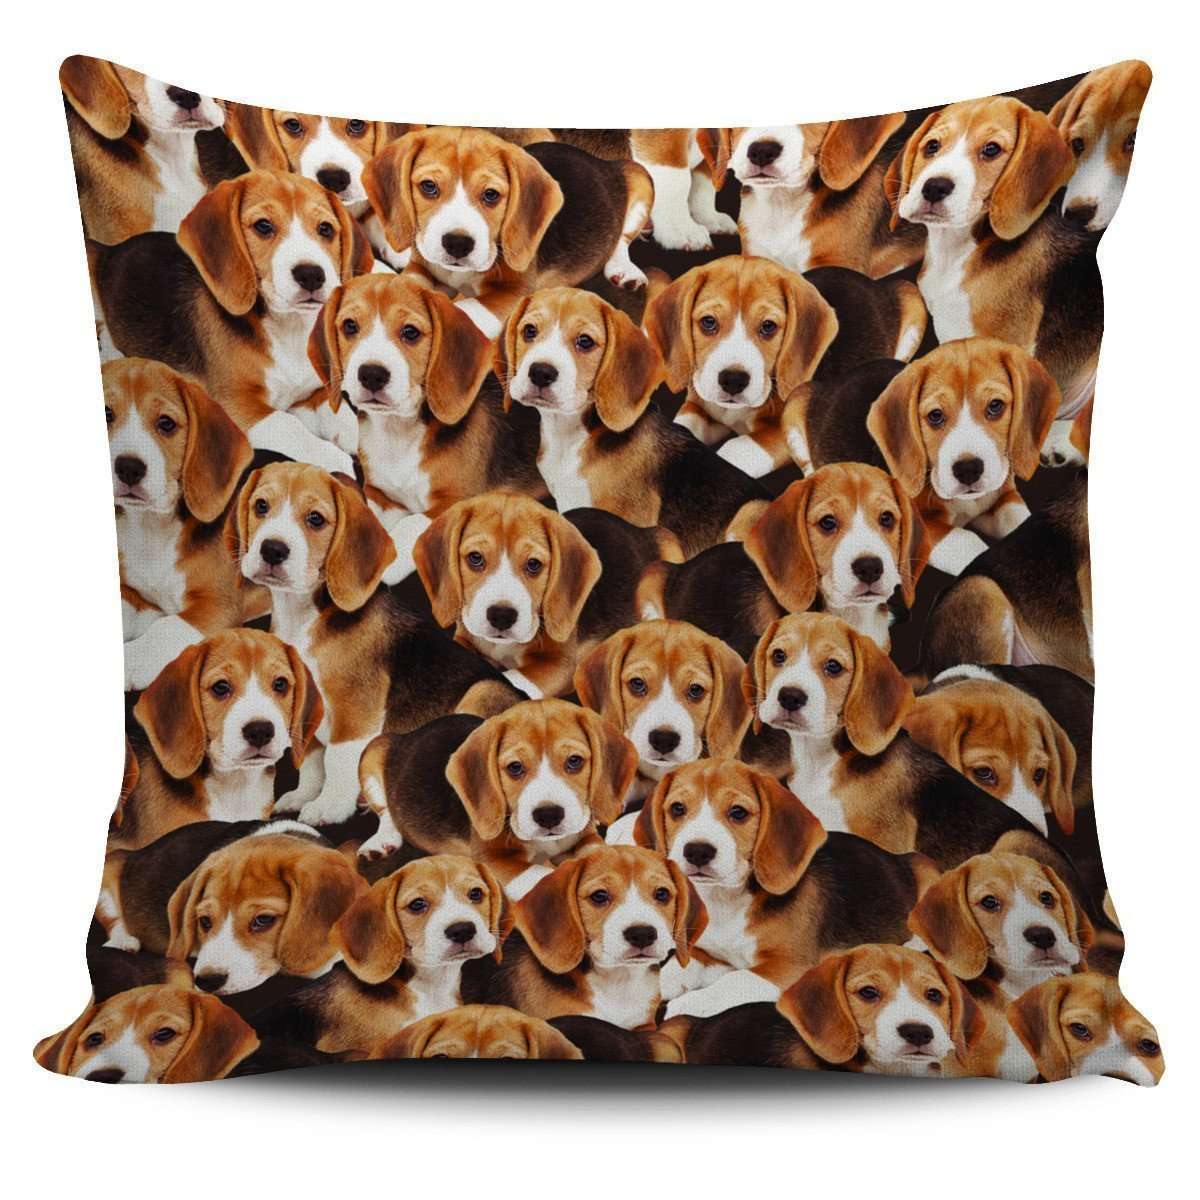 Designs by MyUtopia Shout Out:Beagles all over print Dog Collage Pillowcases,Beagle Puppy Collage,Pillowcases